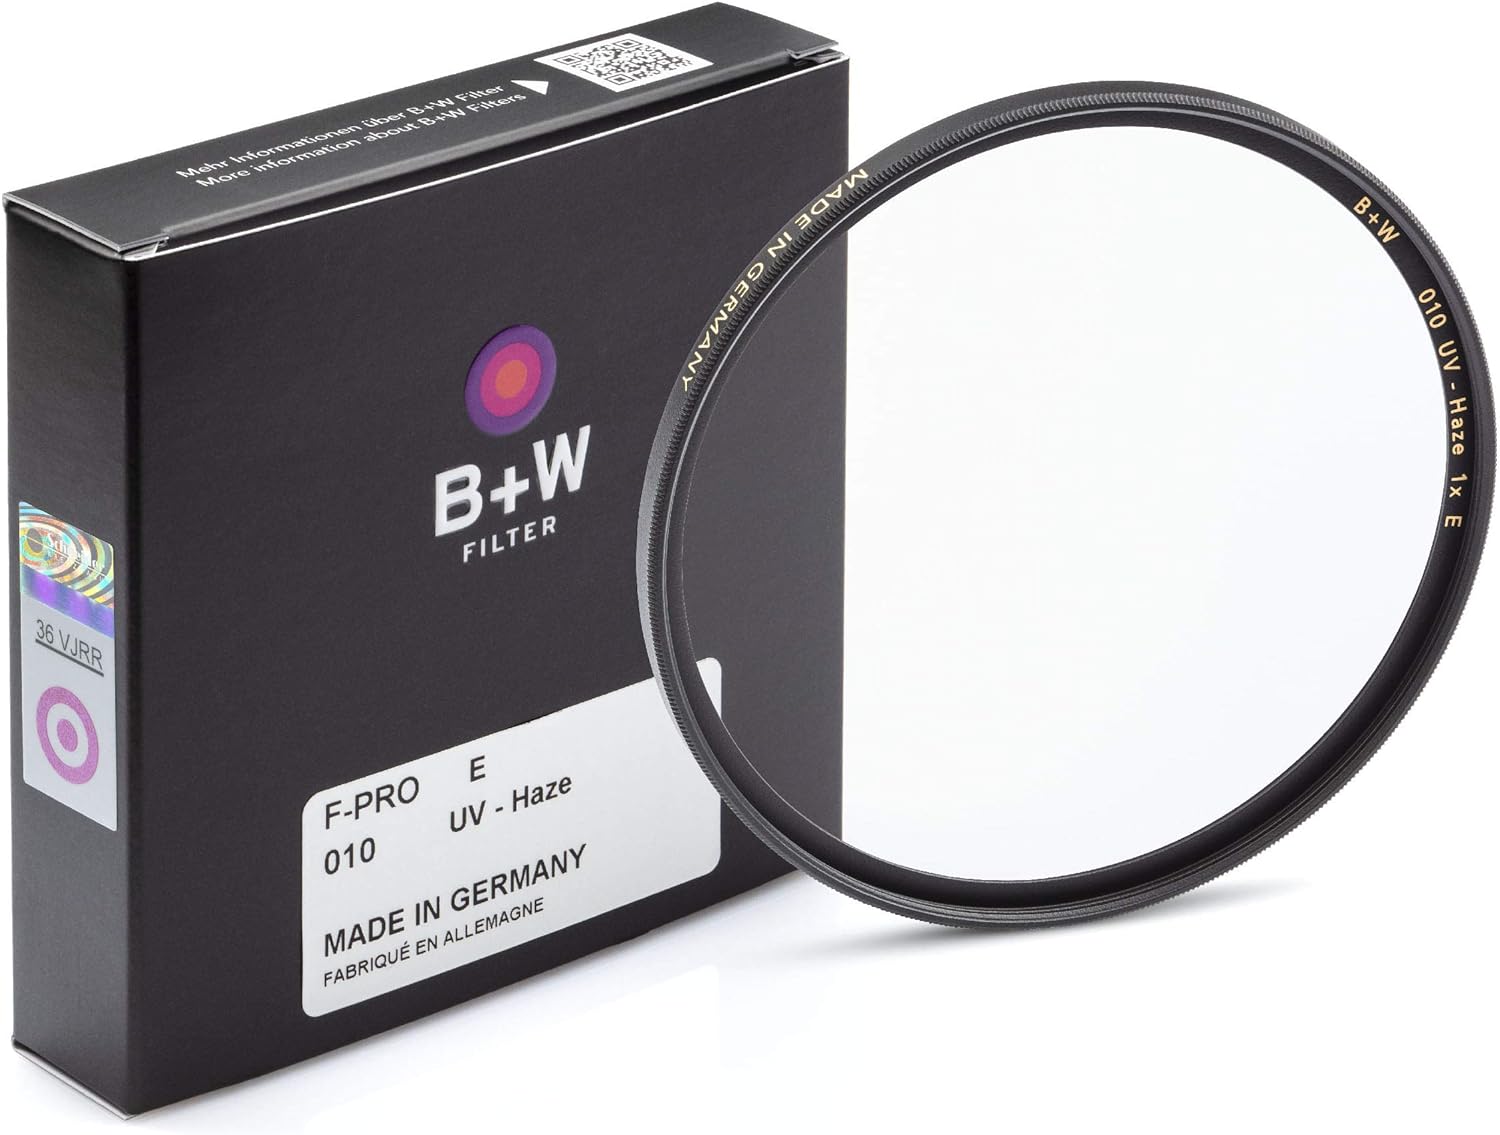 B + W 52mm UV Protection Filter (010) for Camera Lens – Standard Mount (F-PRO), E Coating, 2 Layers Resistant Coating, Photography Filter, 52 mm, Clear Protector